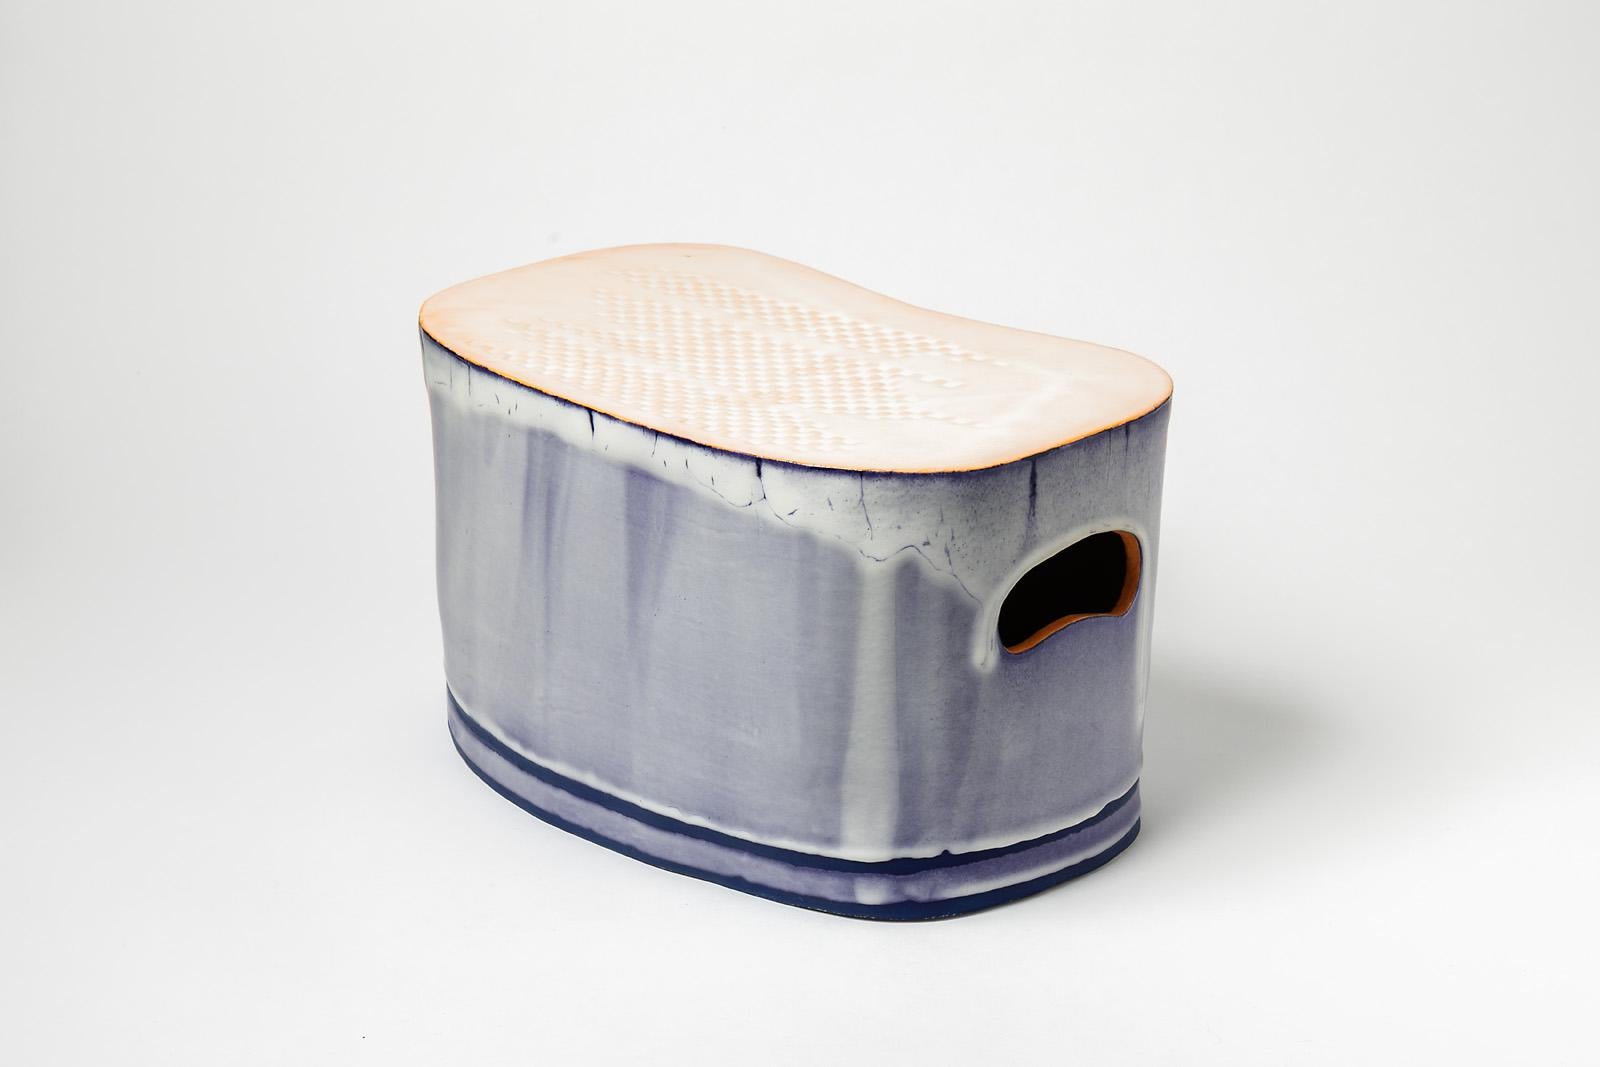 Contemporary Low Stoneware Ceramic Stool Blue and White Glazes Colors by Morin French Design